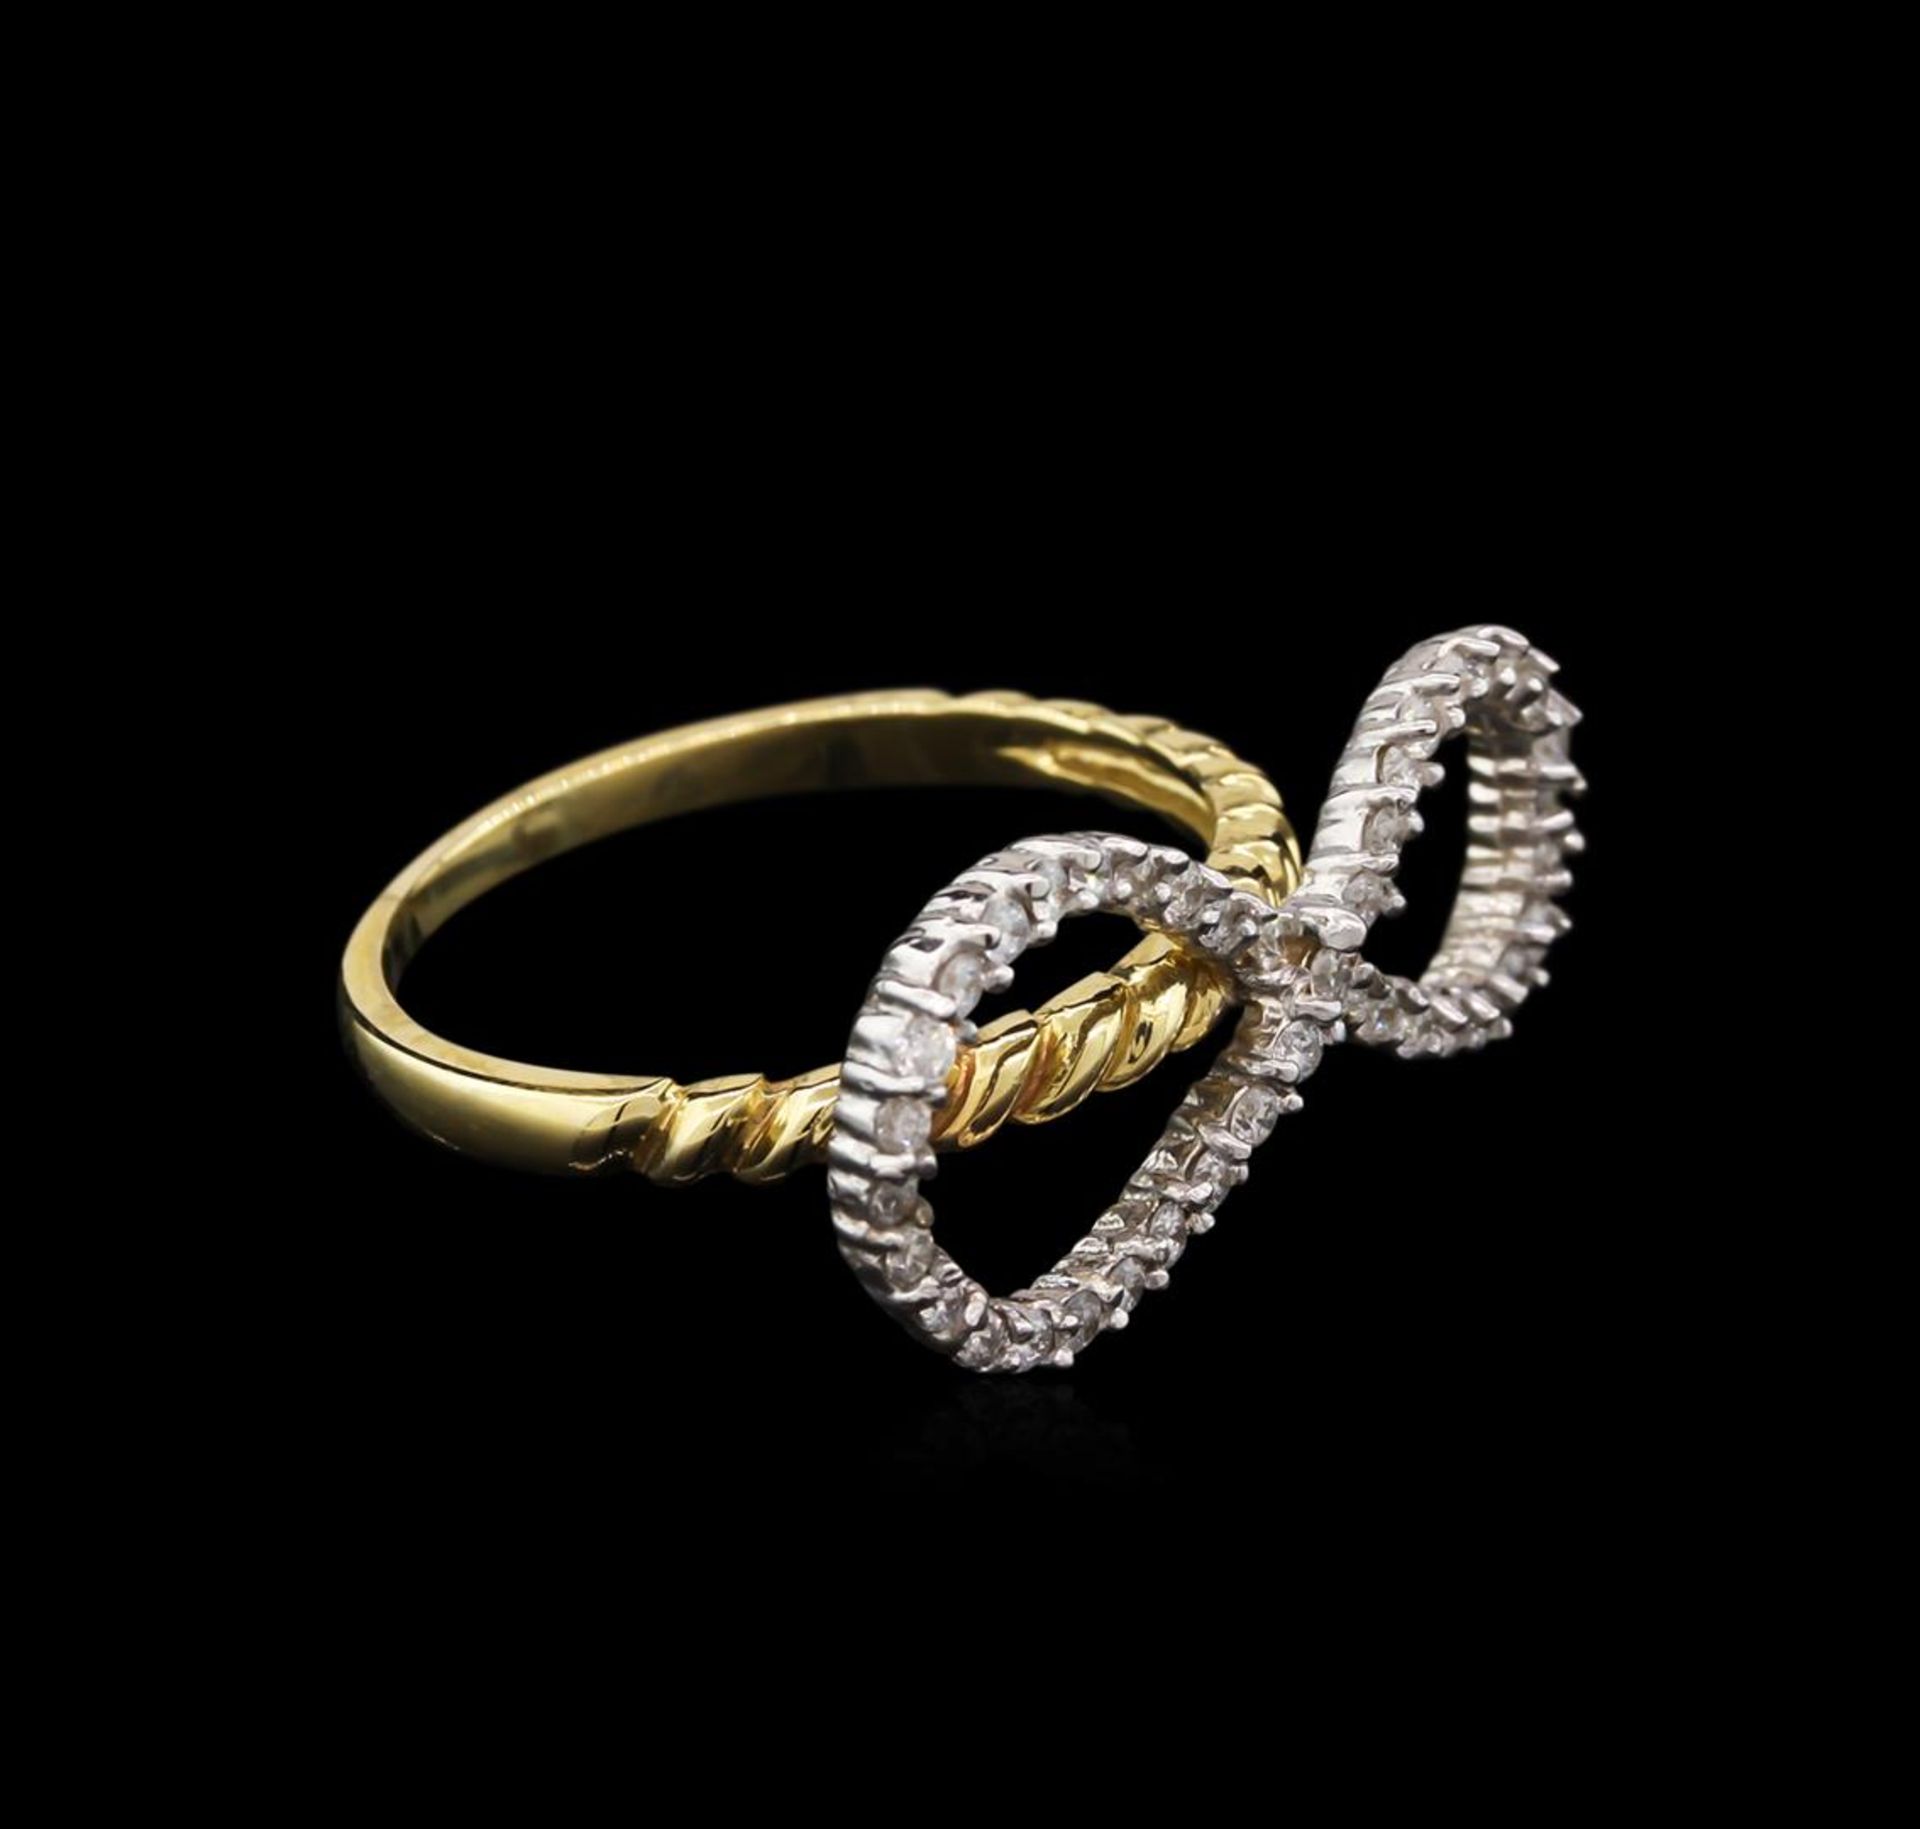 0.40 ctw Diamond Ring - 14KT Two-Tone Gold - Image 2 of 2